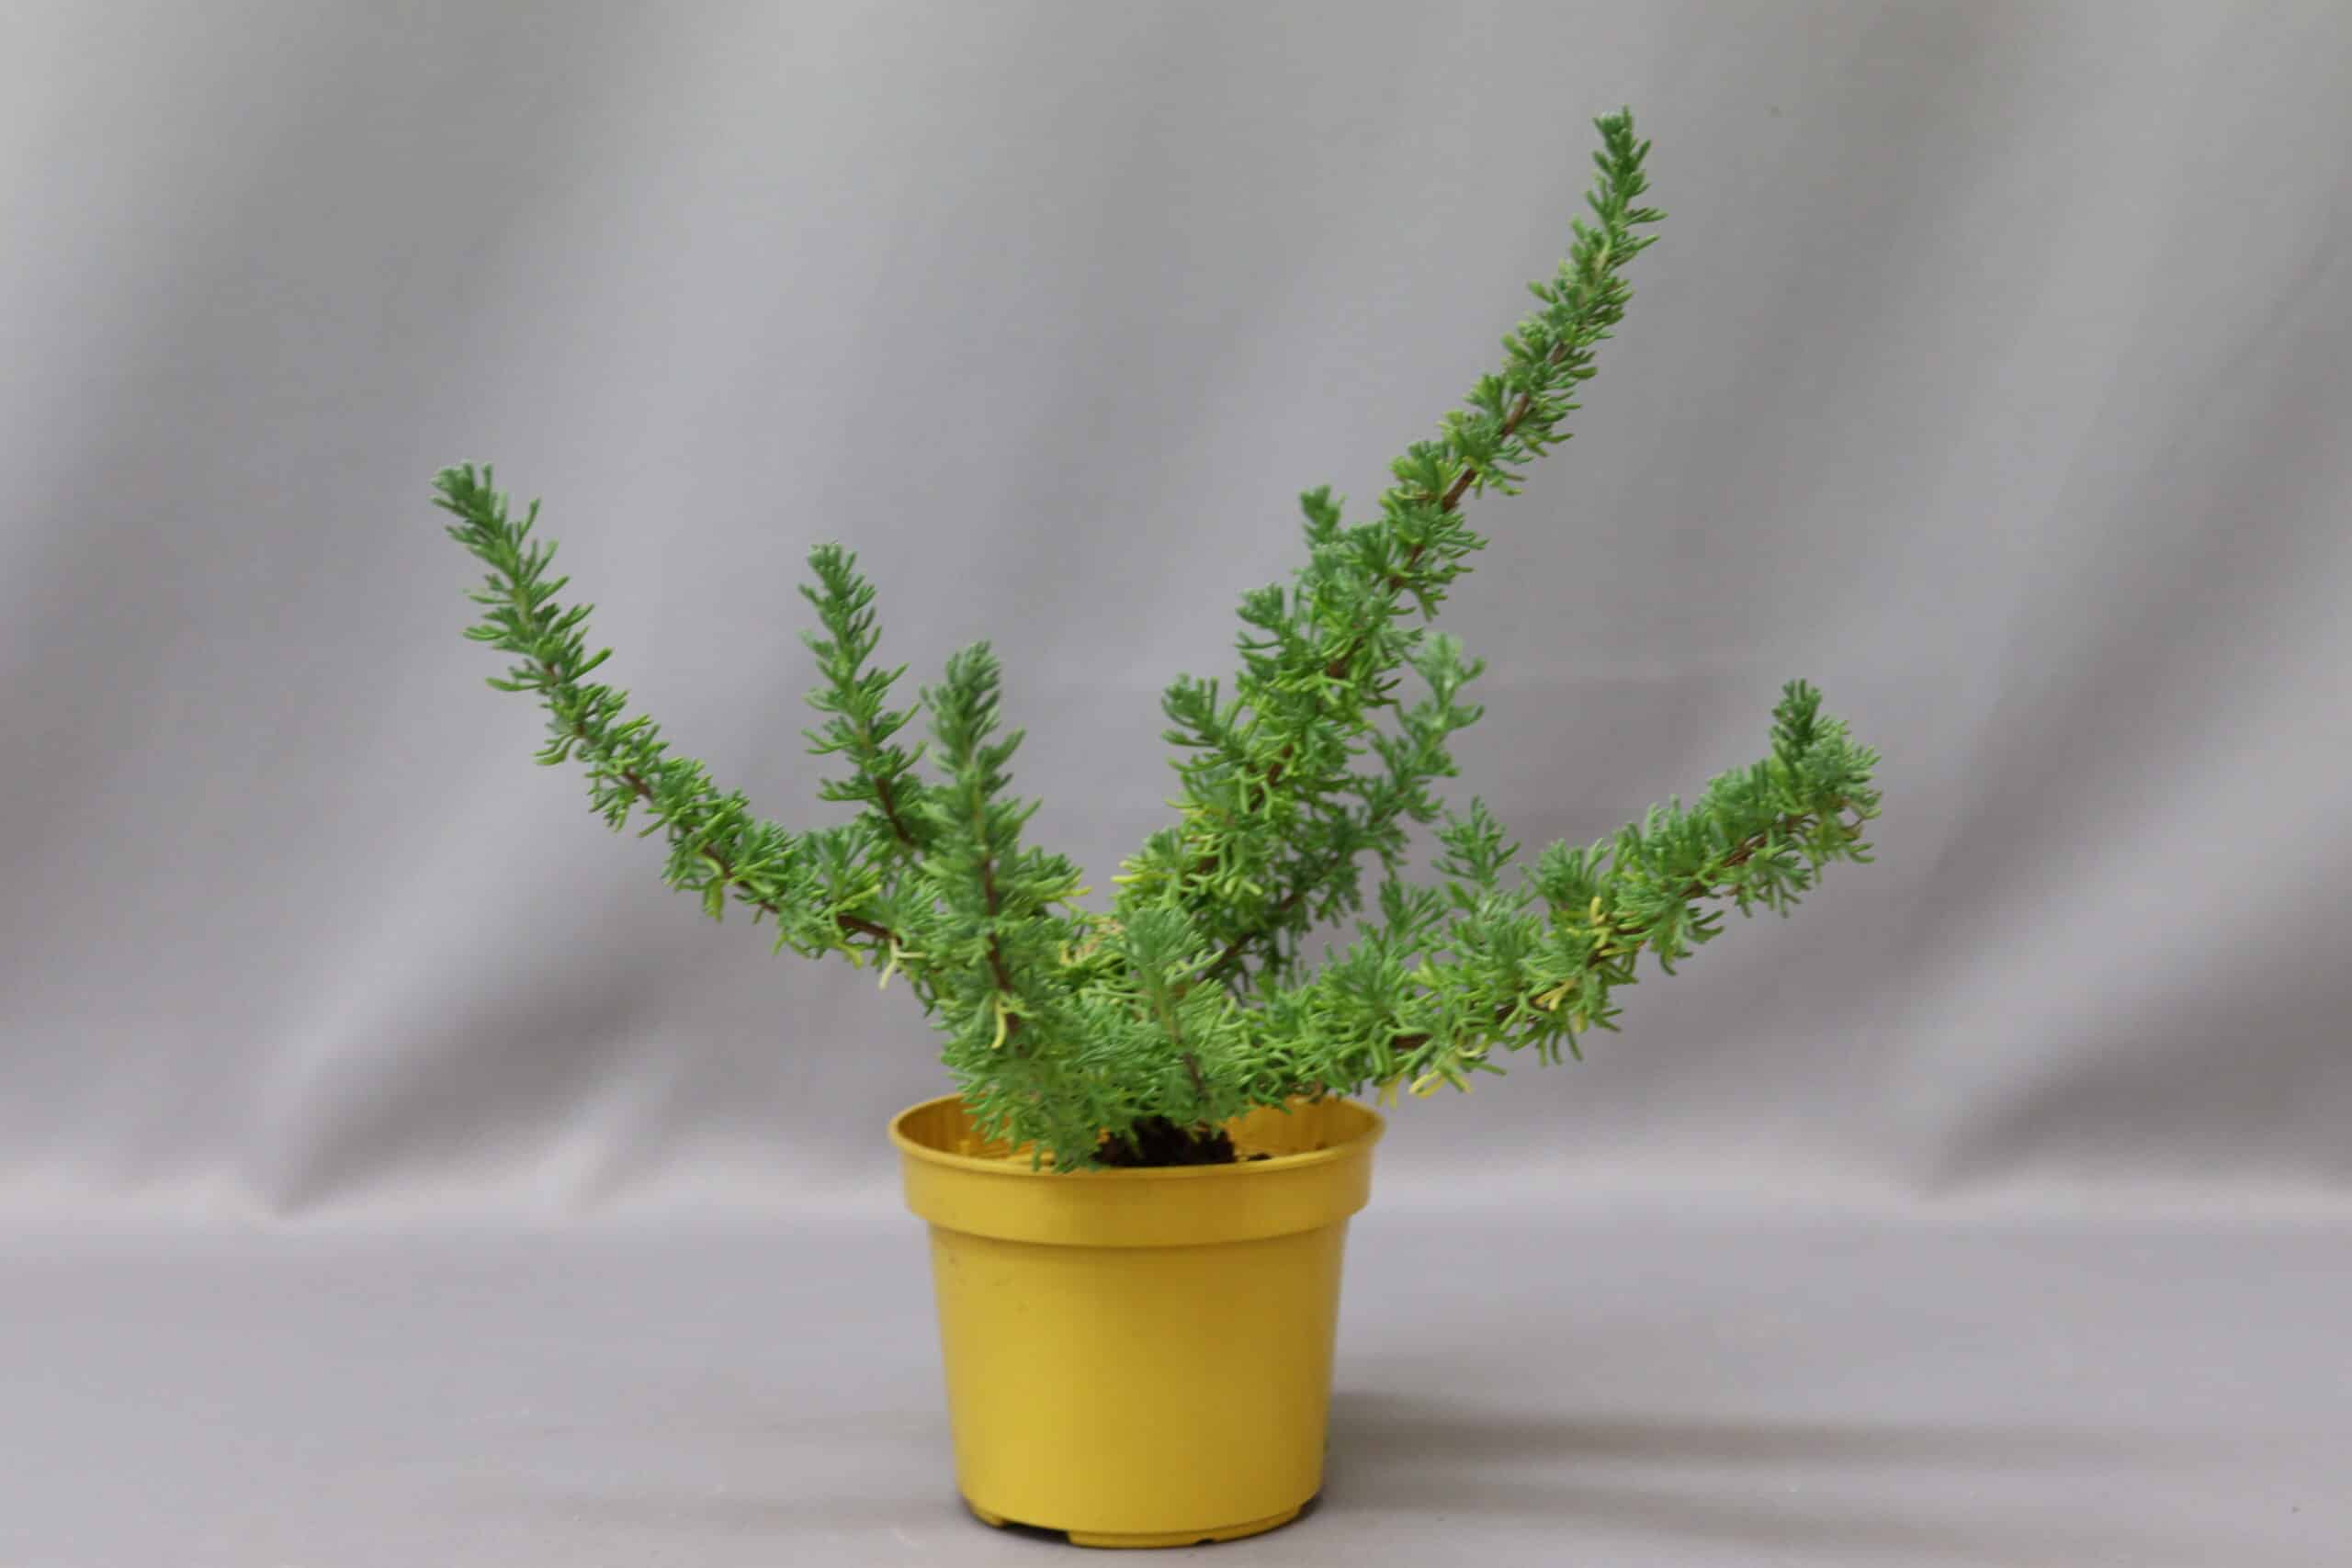 A wild rosemary (kapokbos) plant in a yellow plastic pot against a white background.